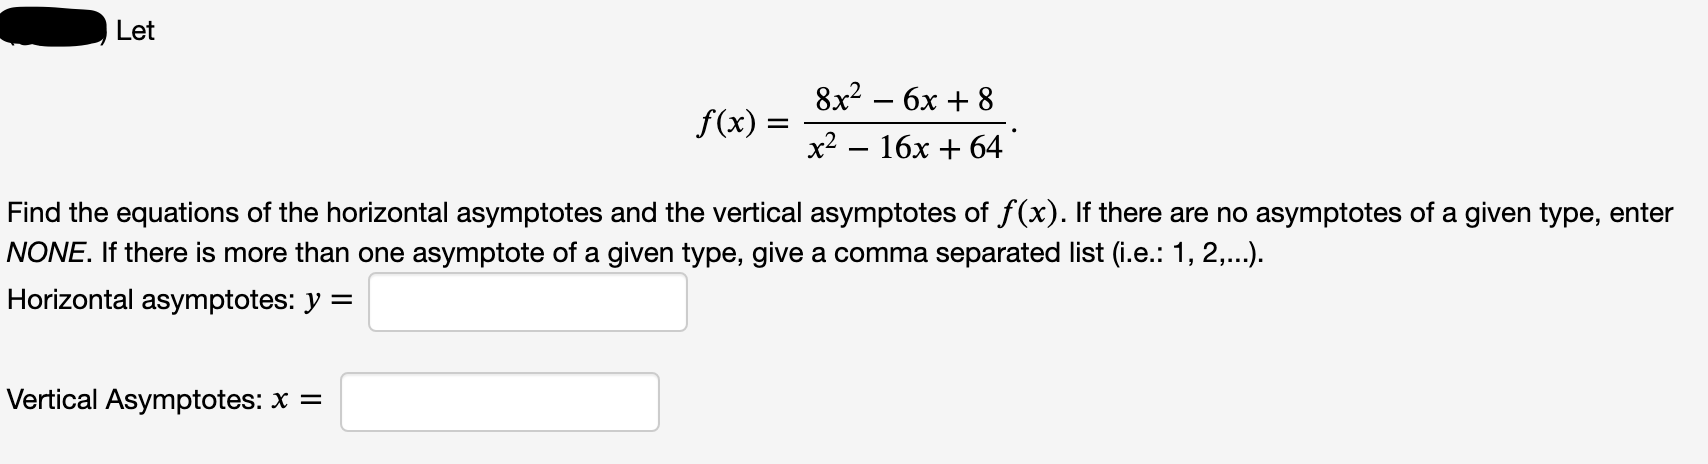 8x2 — 6х + 8
х? — 16х + 64
e horizontal asymptotes and the vertical asymptotes of f(x). If there are no asymptotes of a give
f(x) =
han one asymptote of a given type, give a comma separated list (i.e.: 1, 2,.).
